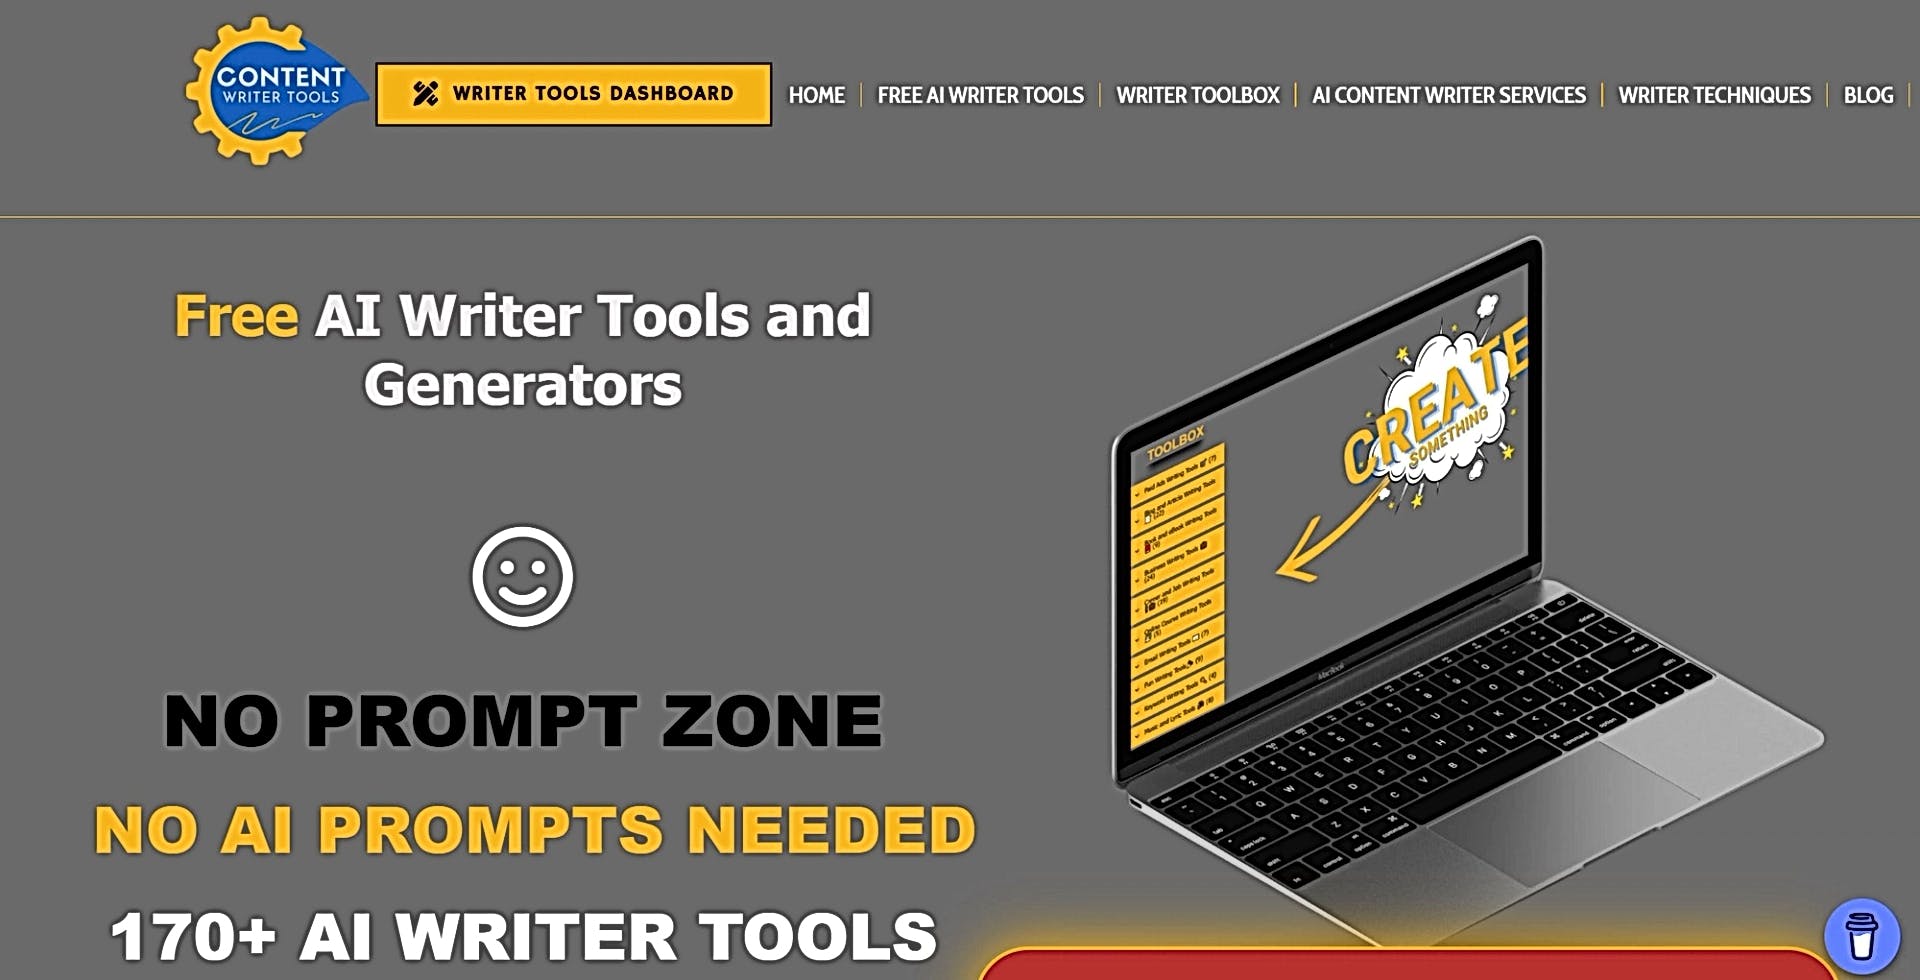 Content Writer Tools featured